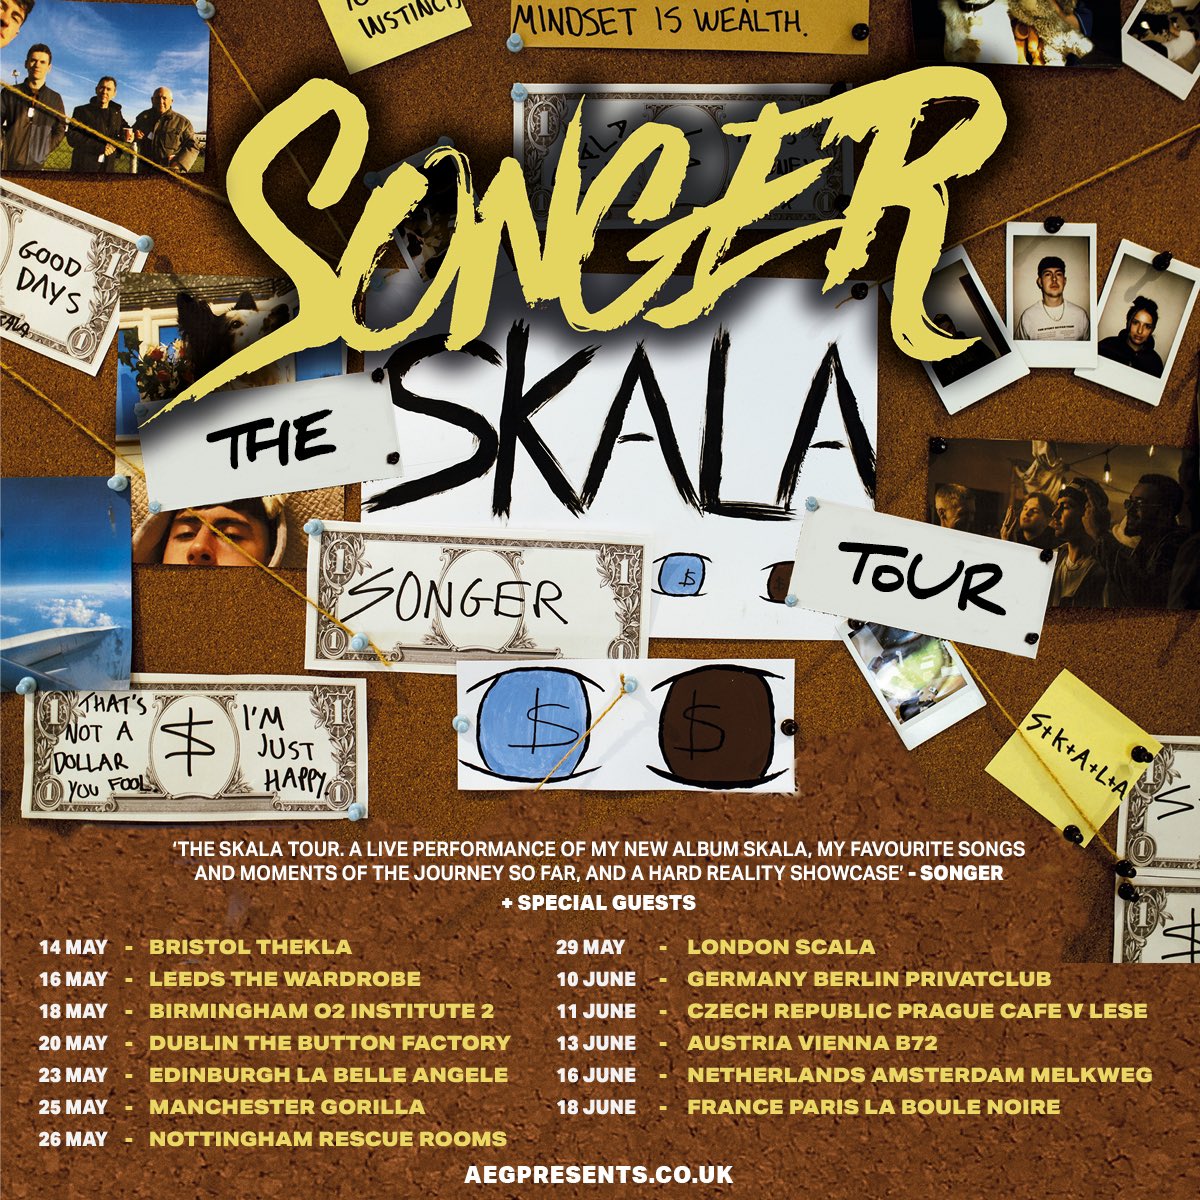 hello hello what’s good twitter we back with a European tour of my upcoming album SKALA. tickets go on sale at 10am tomorrow morning, i’ll wack the link in my bio first thing, thank you for makin this possible 🫶🏻